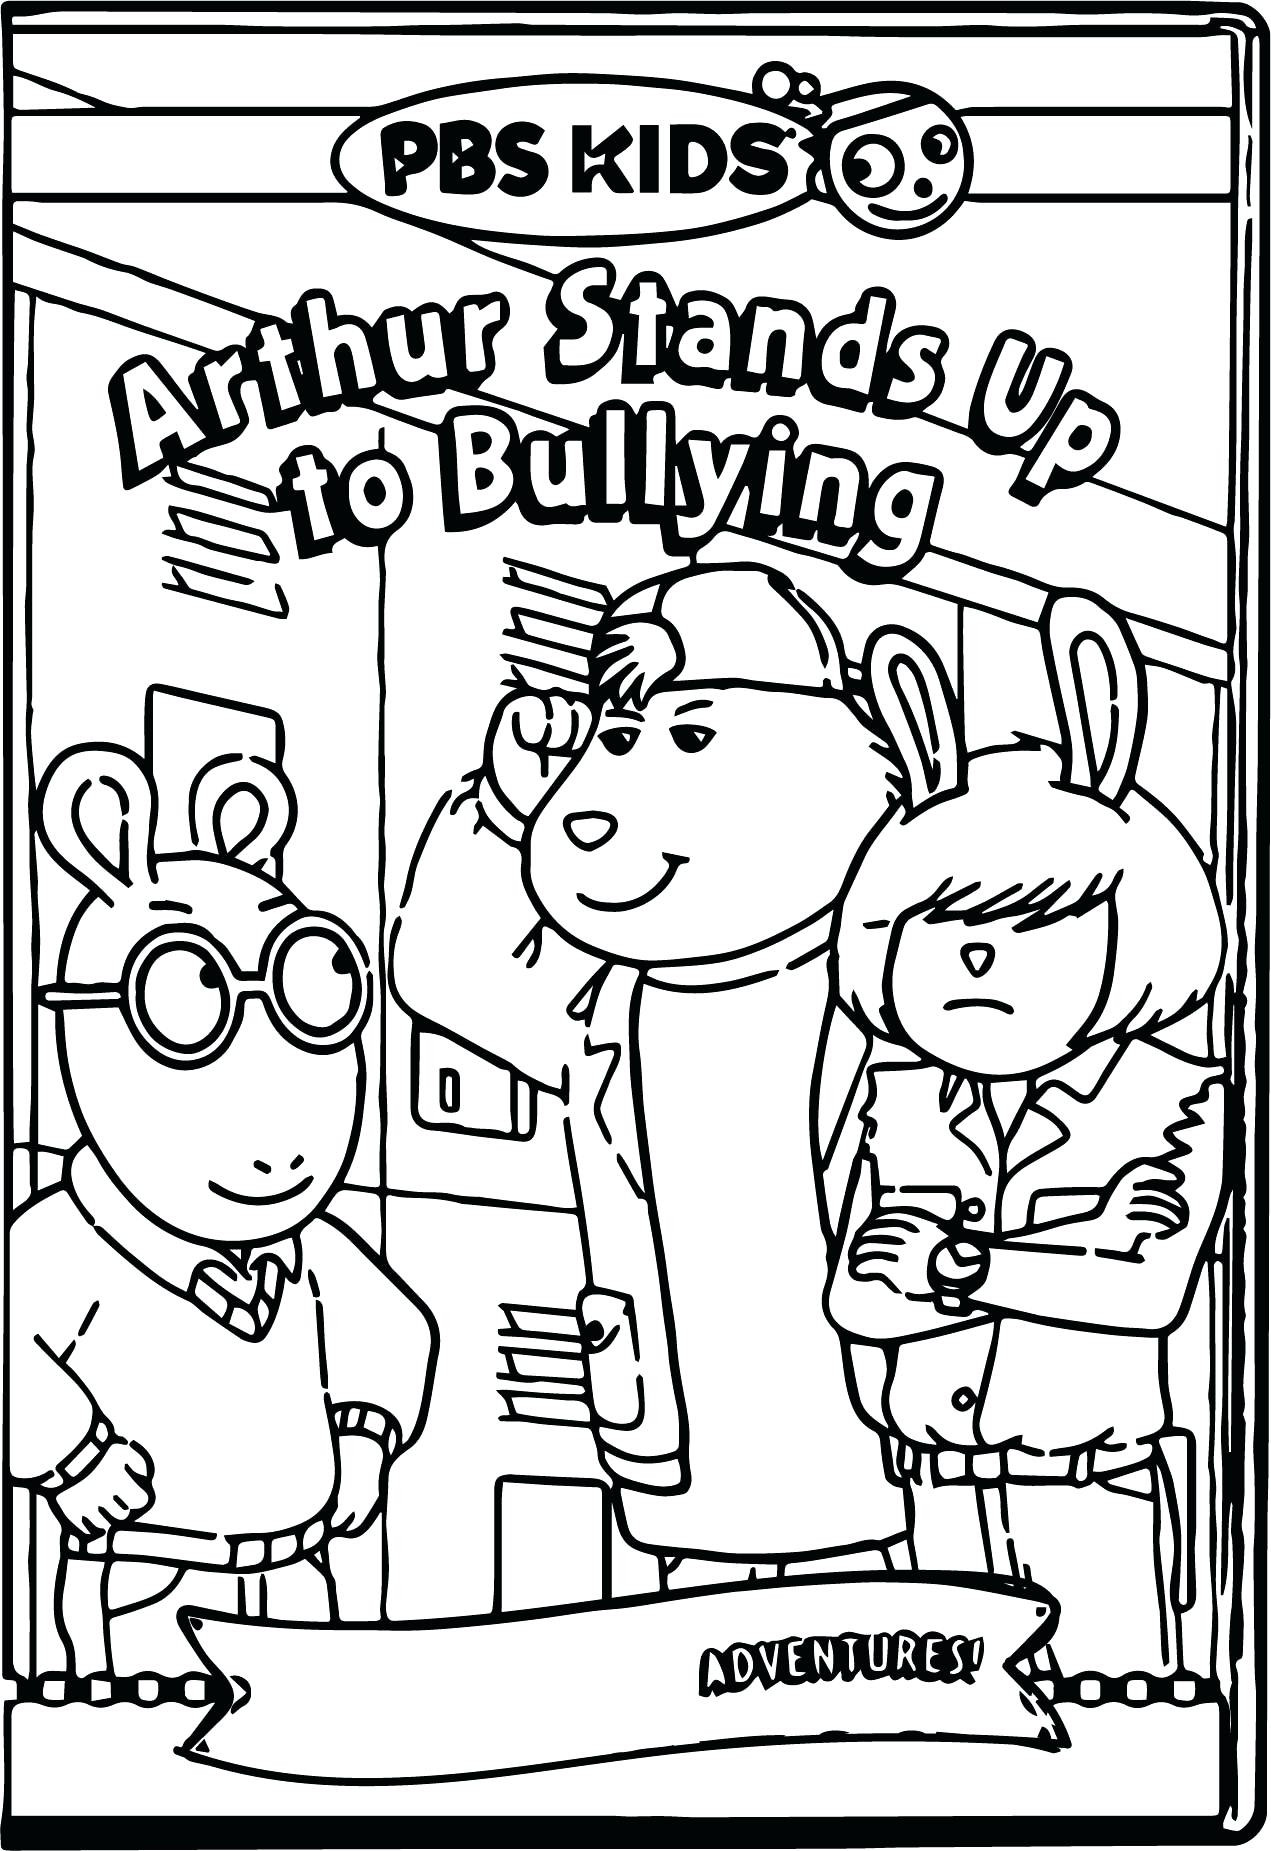 Pbskids.Org Coloring Pages
 Pbs Kids Coloring Pages at GetColorings